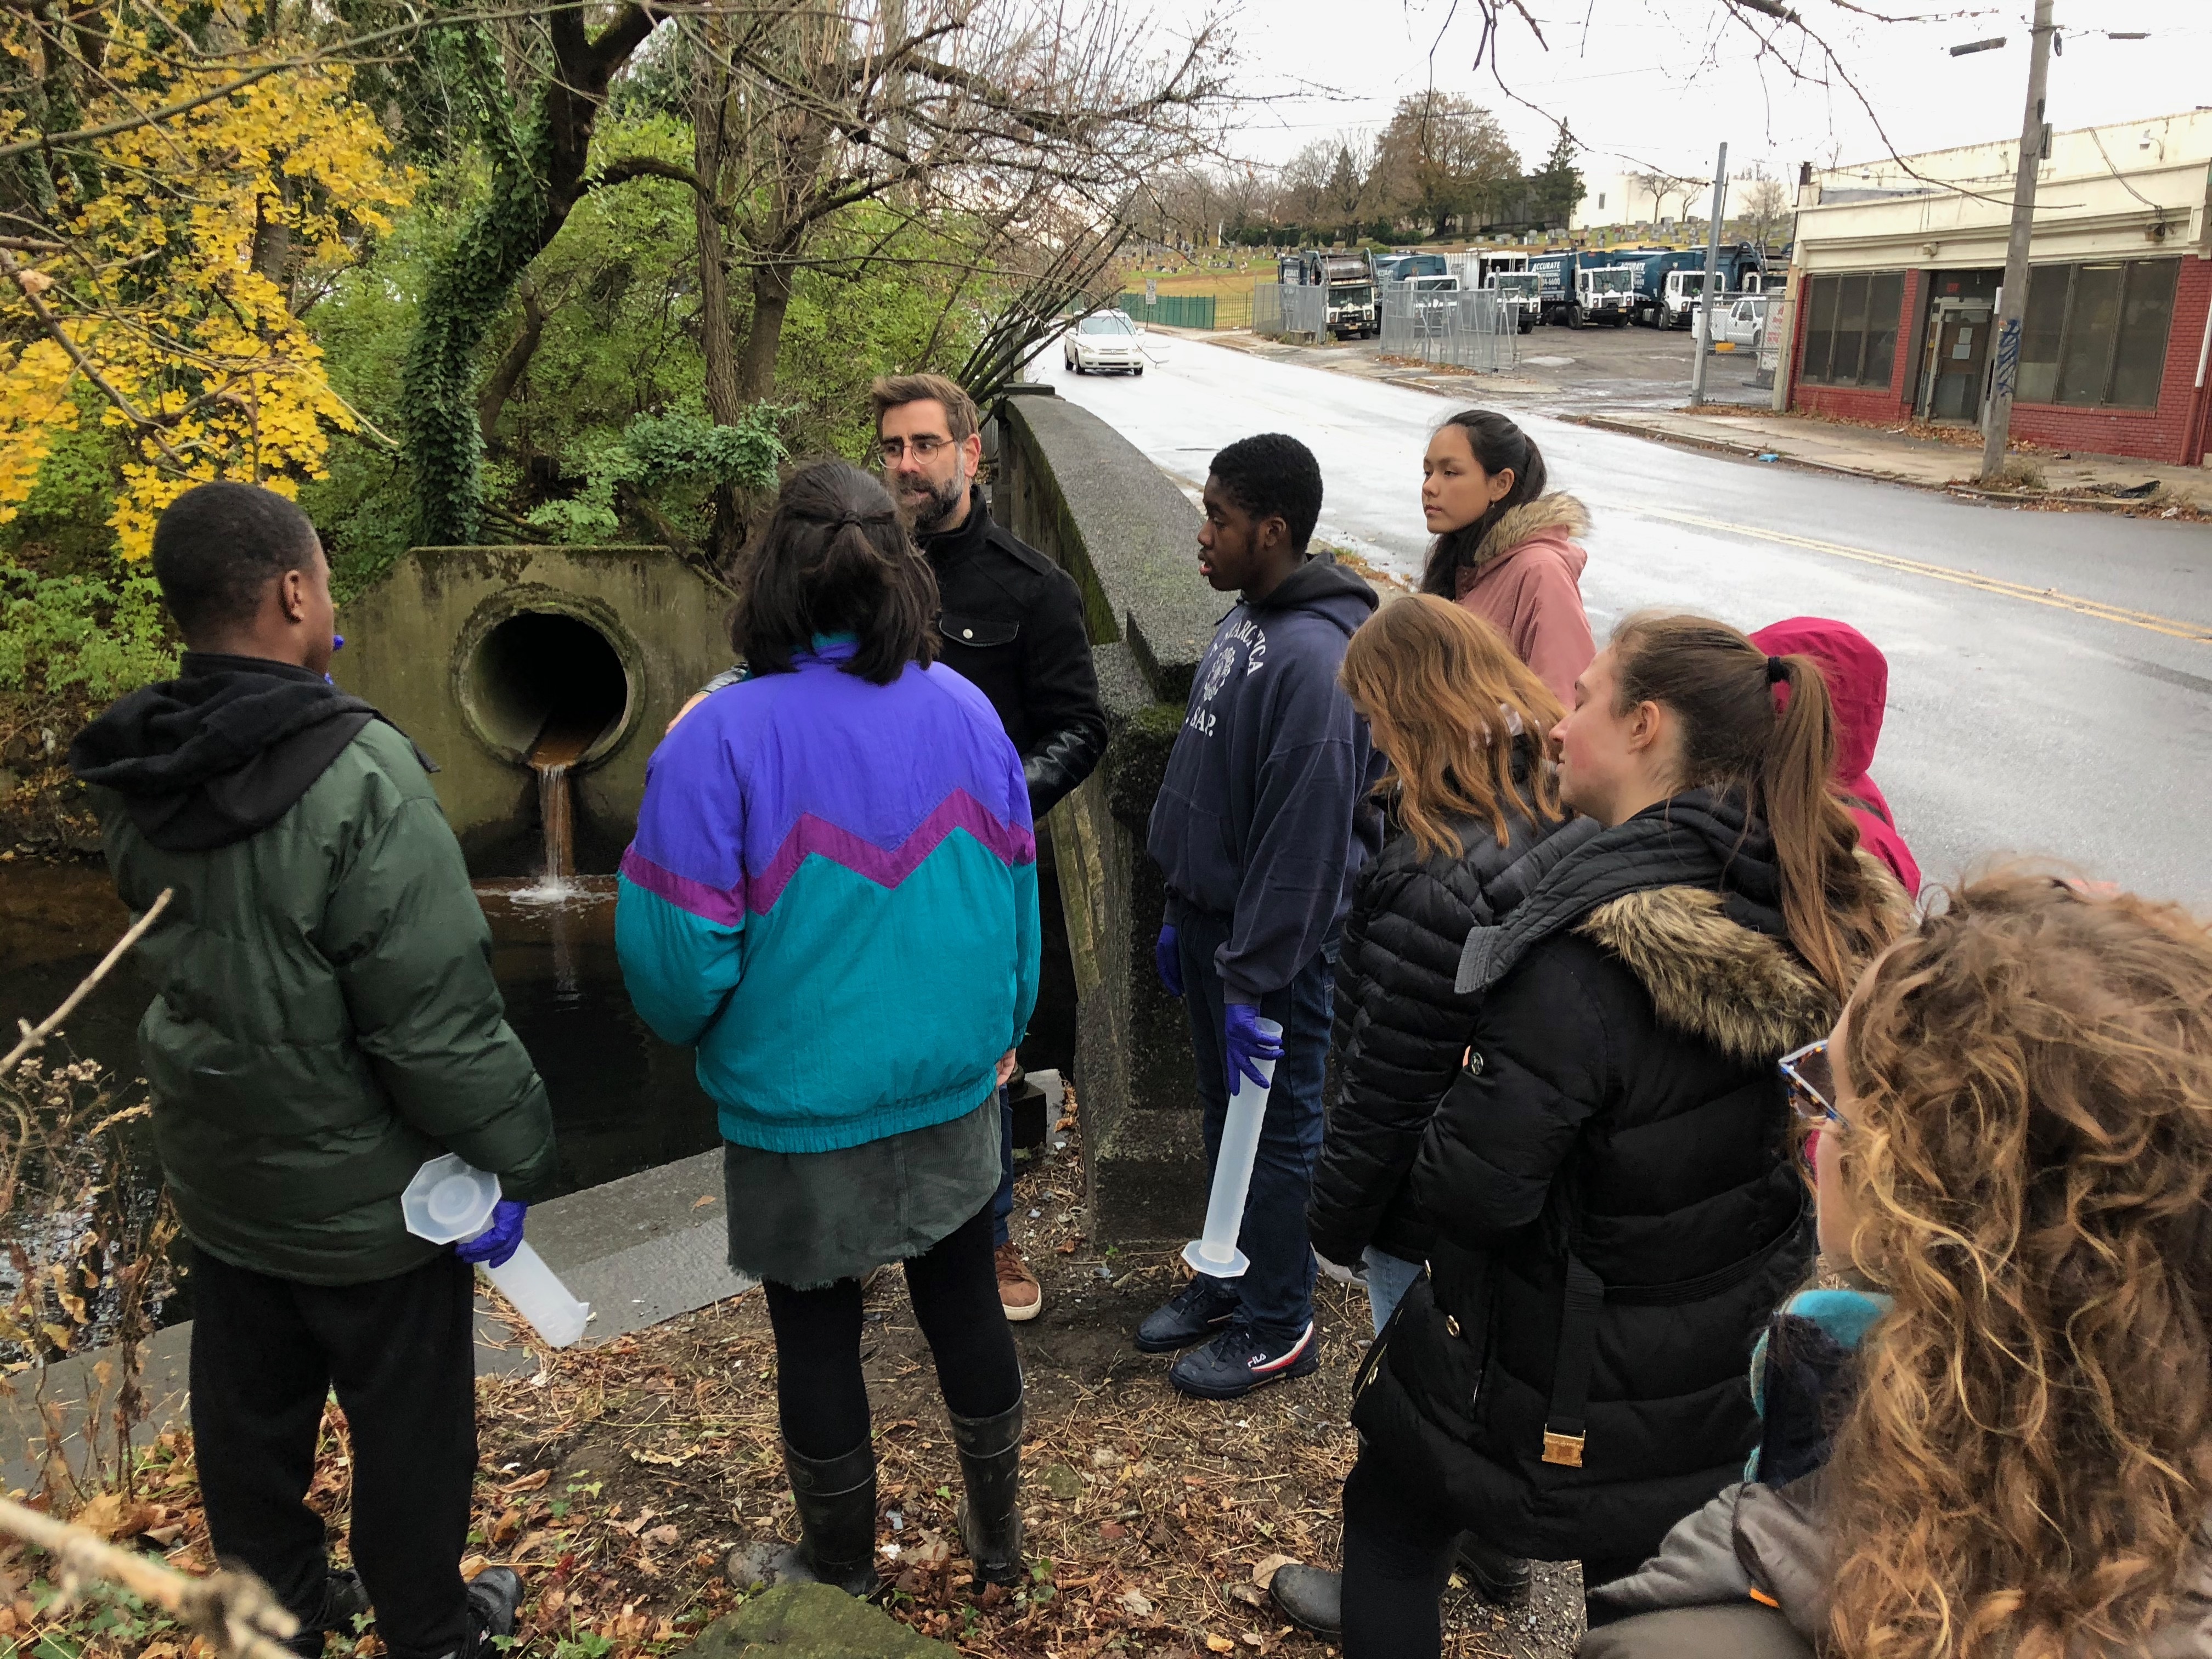 PWD Outreach Specialist Dan Schupsky leads a tour group on a rainy day, as a an outfall in the background trickles a small amount of runoff into a creek